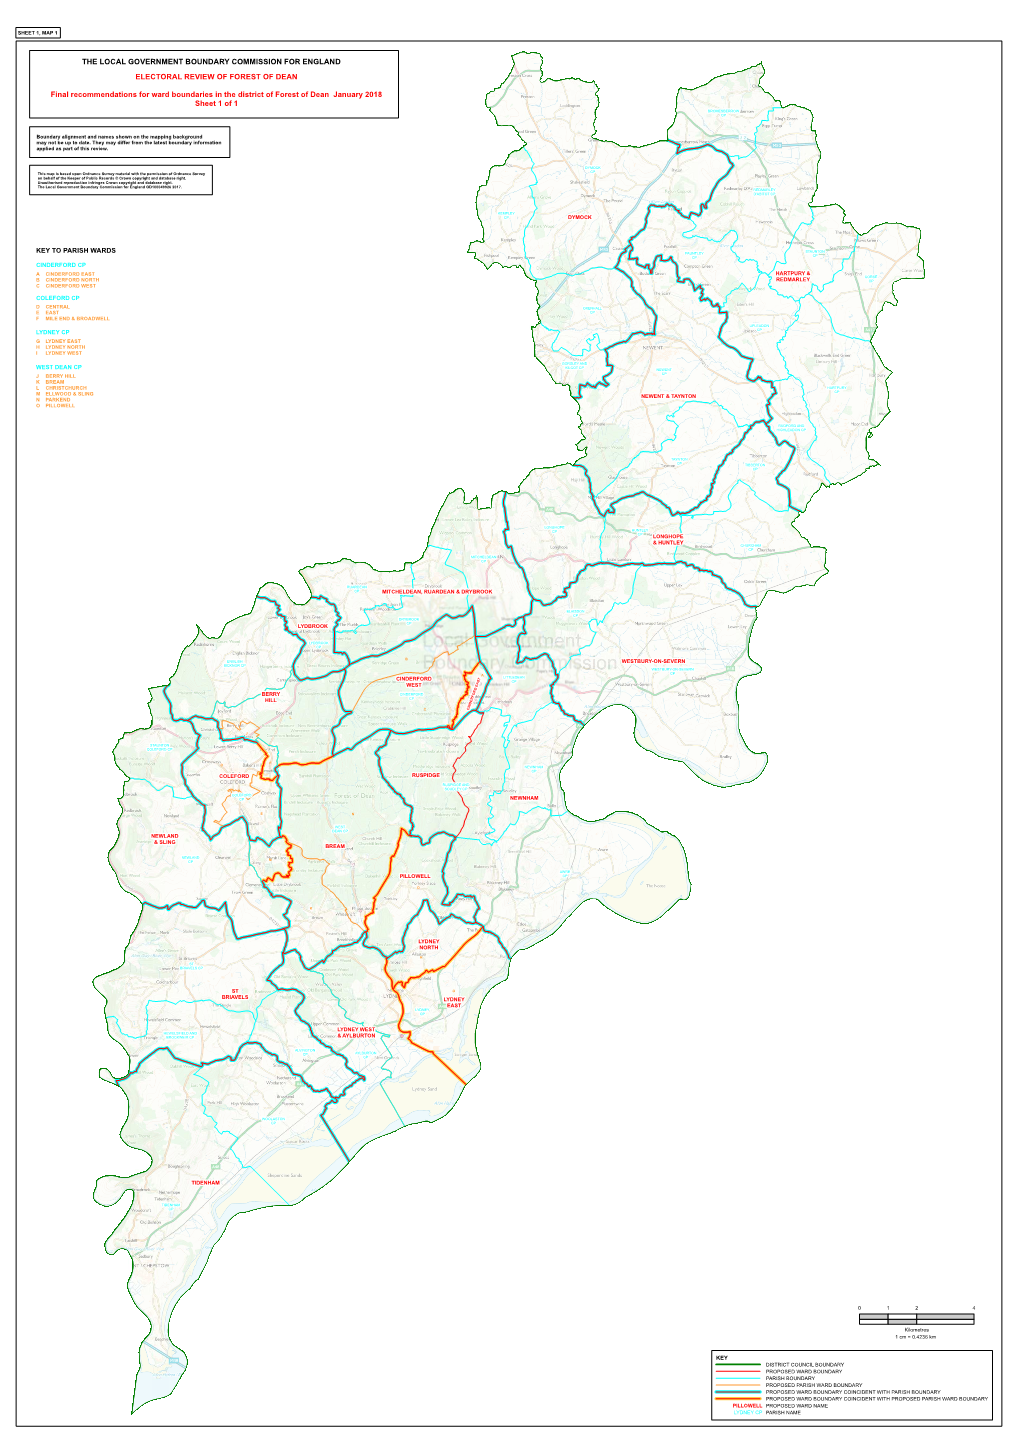 The Local Government Boundary Commission for England Electoral Review of Forest of Dean